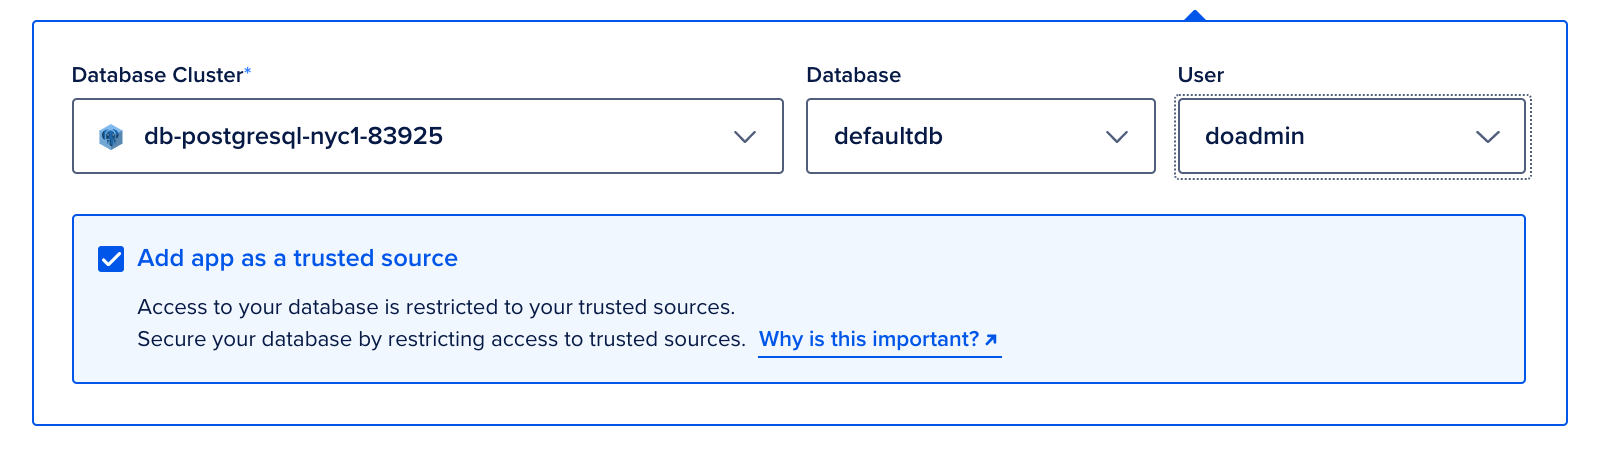 Managed DB Enable Trusted